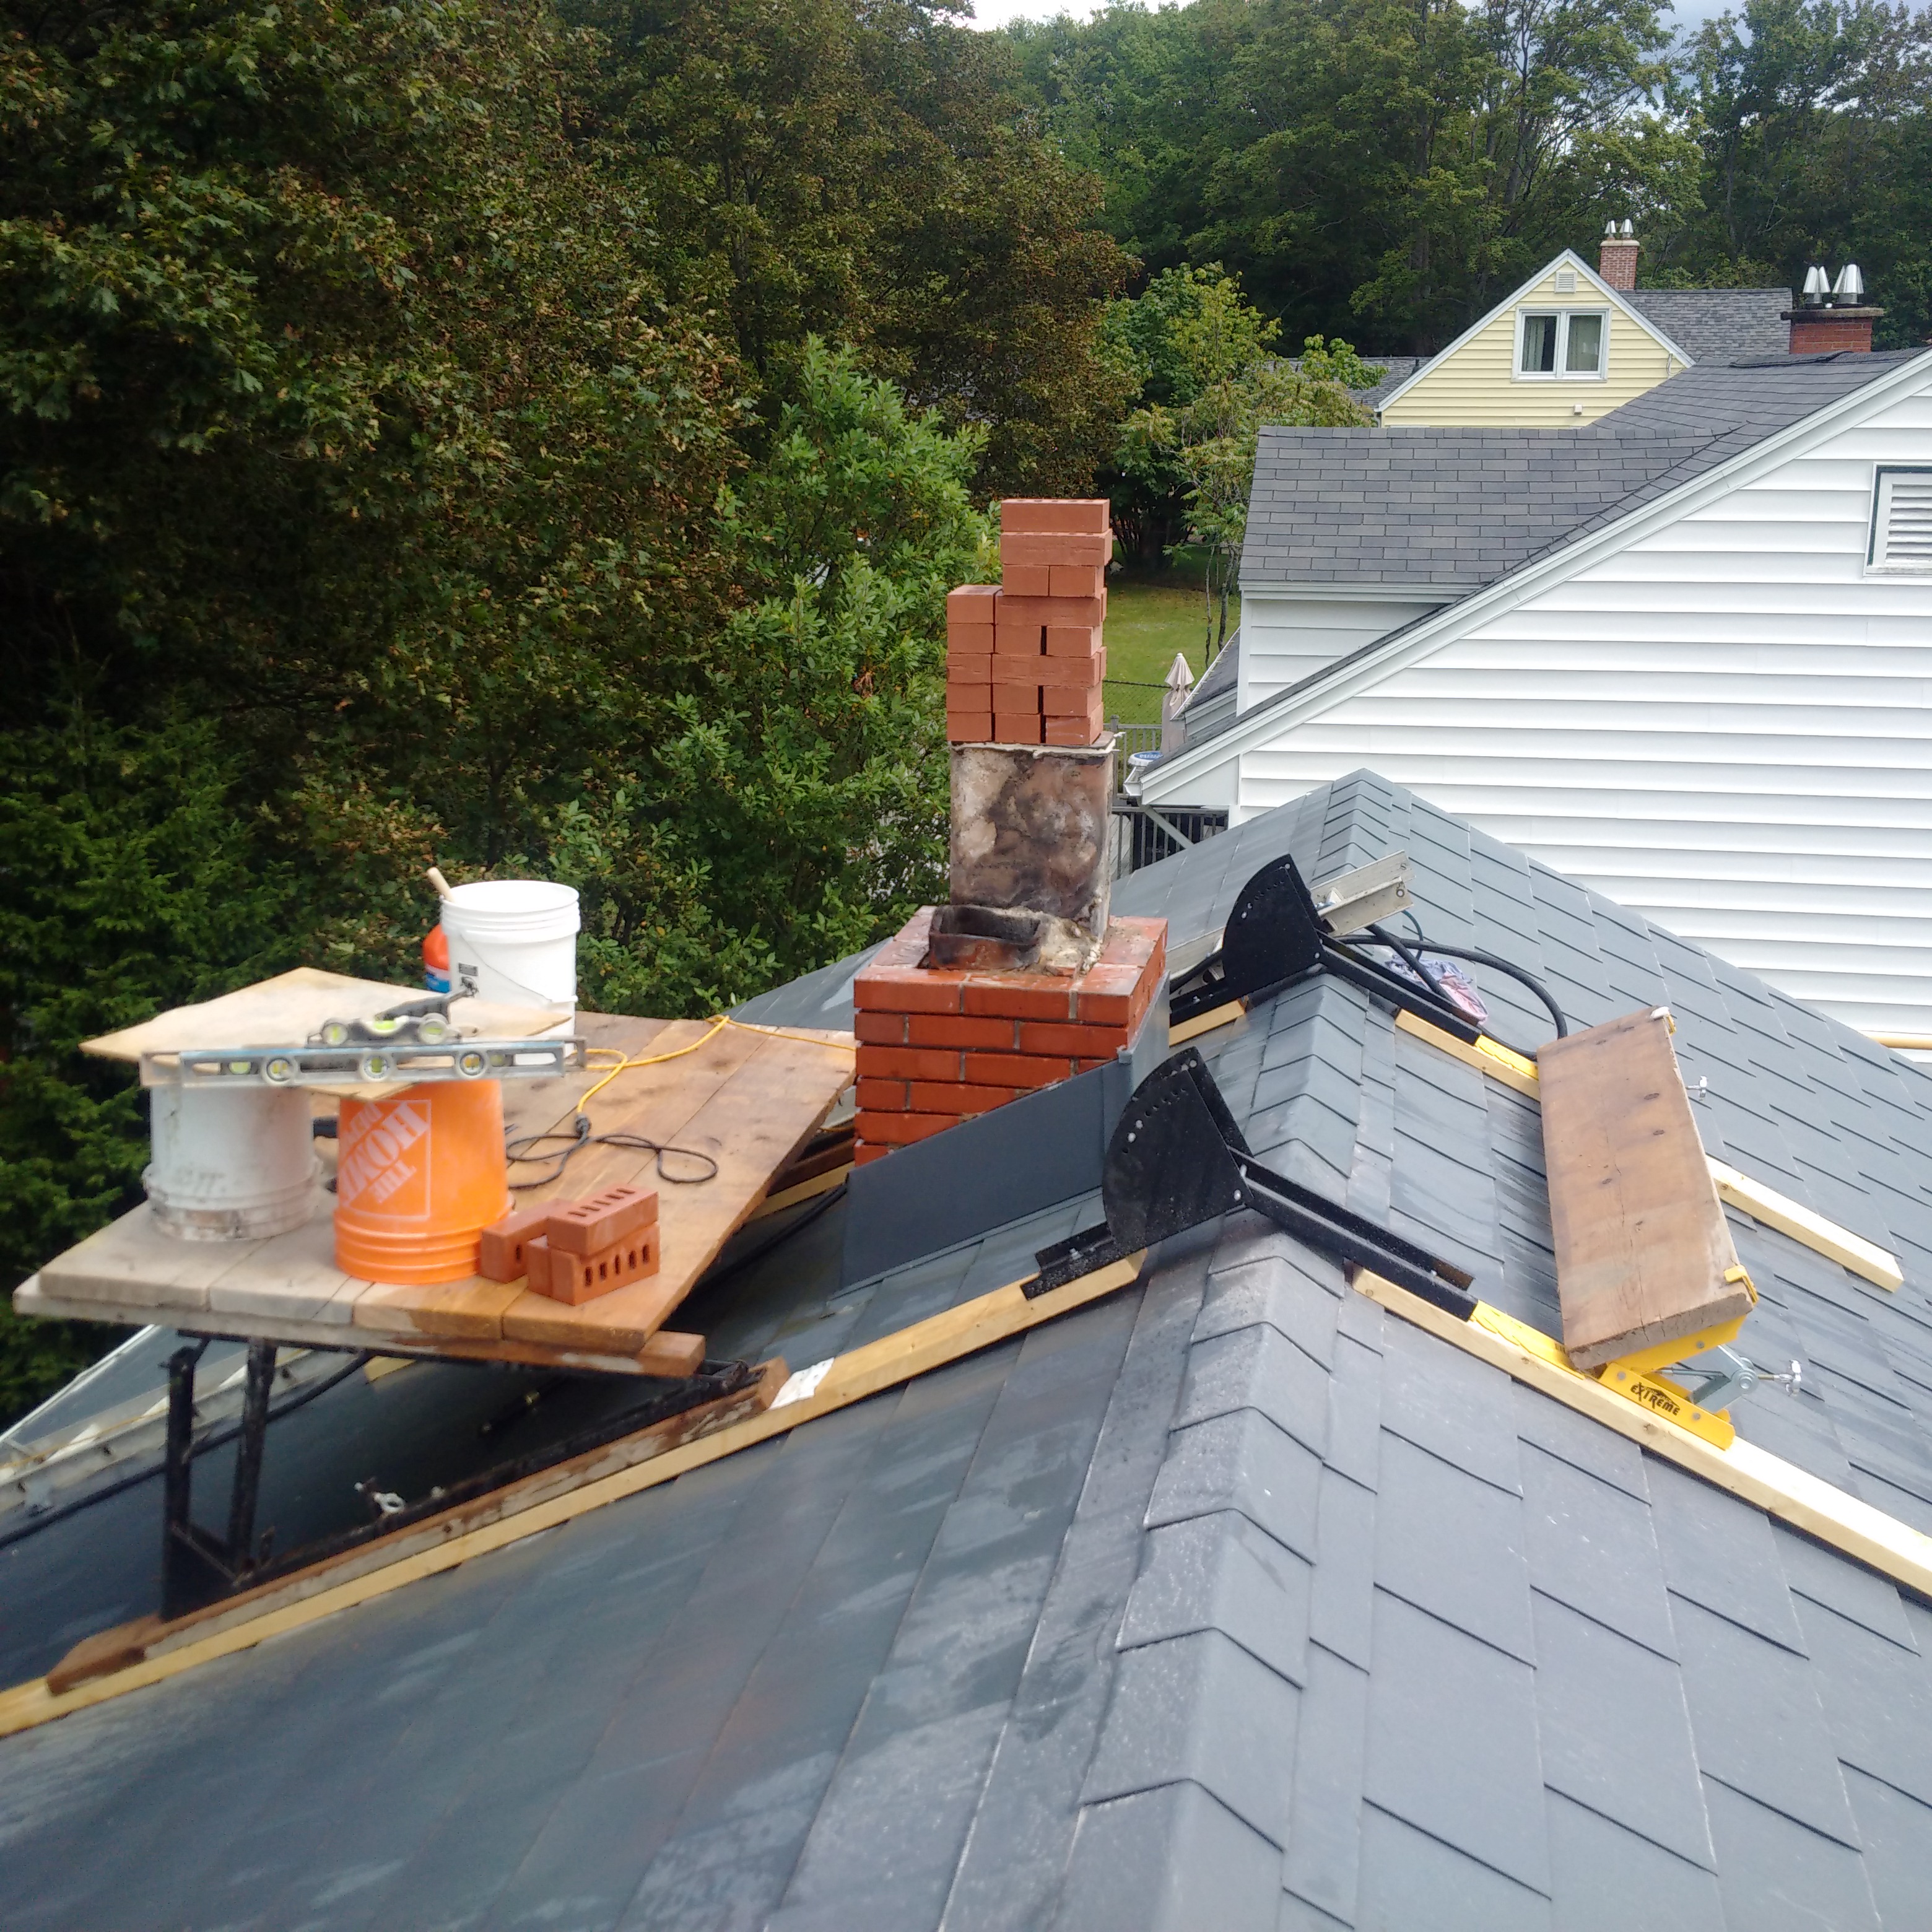 image of chimney construction-rebuild services completed in Dartmouth,NS by Pro Chimney Services based in Halifax, NS servicing all of the Halifax-Dartmouth Regional Municipality, Bedford, Sackville, Mount Uniacke, Windsor, Hantsport , Wolfville, Kentville, Chester, Mahone Bay, Lunenburg, Bridgewater, Liverpool, Fall River, Wellington, Enfield, Elmsdale, Brookfield, Truro, Musquodoboit Harbour & surrounding areas.